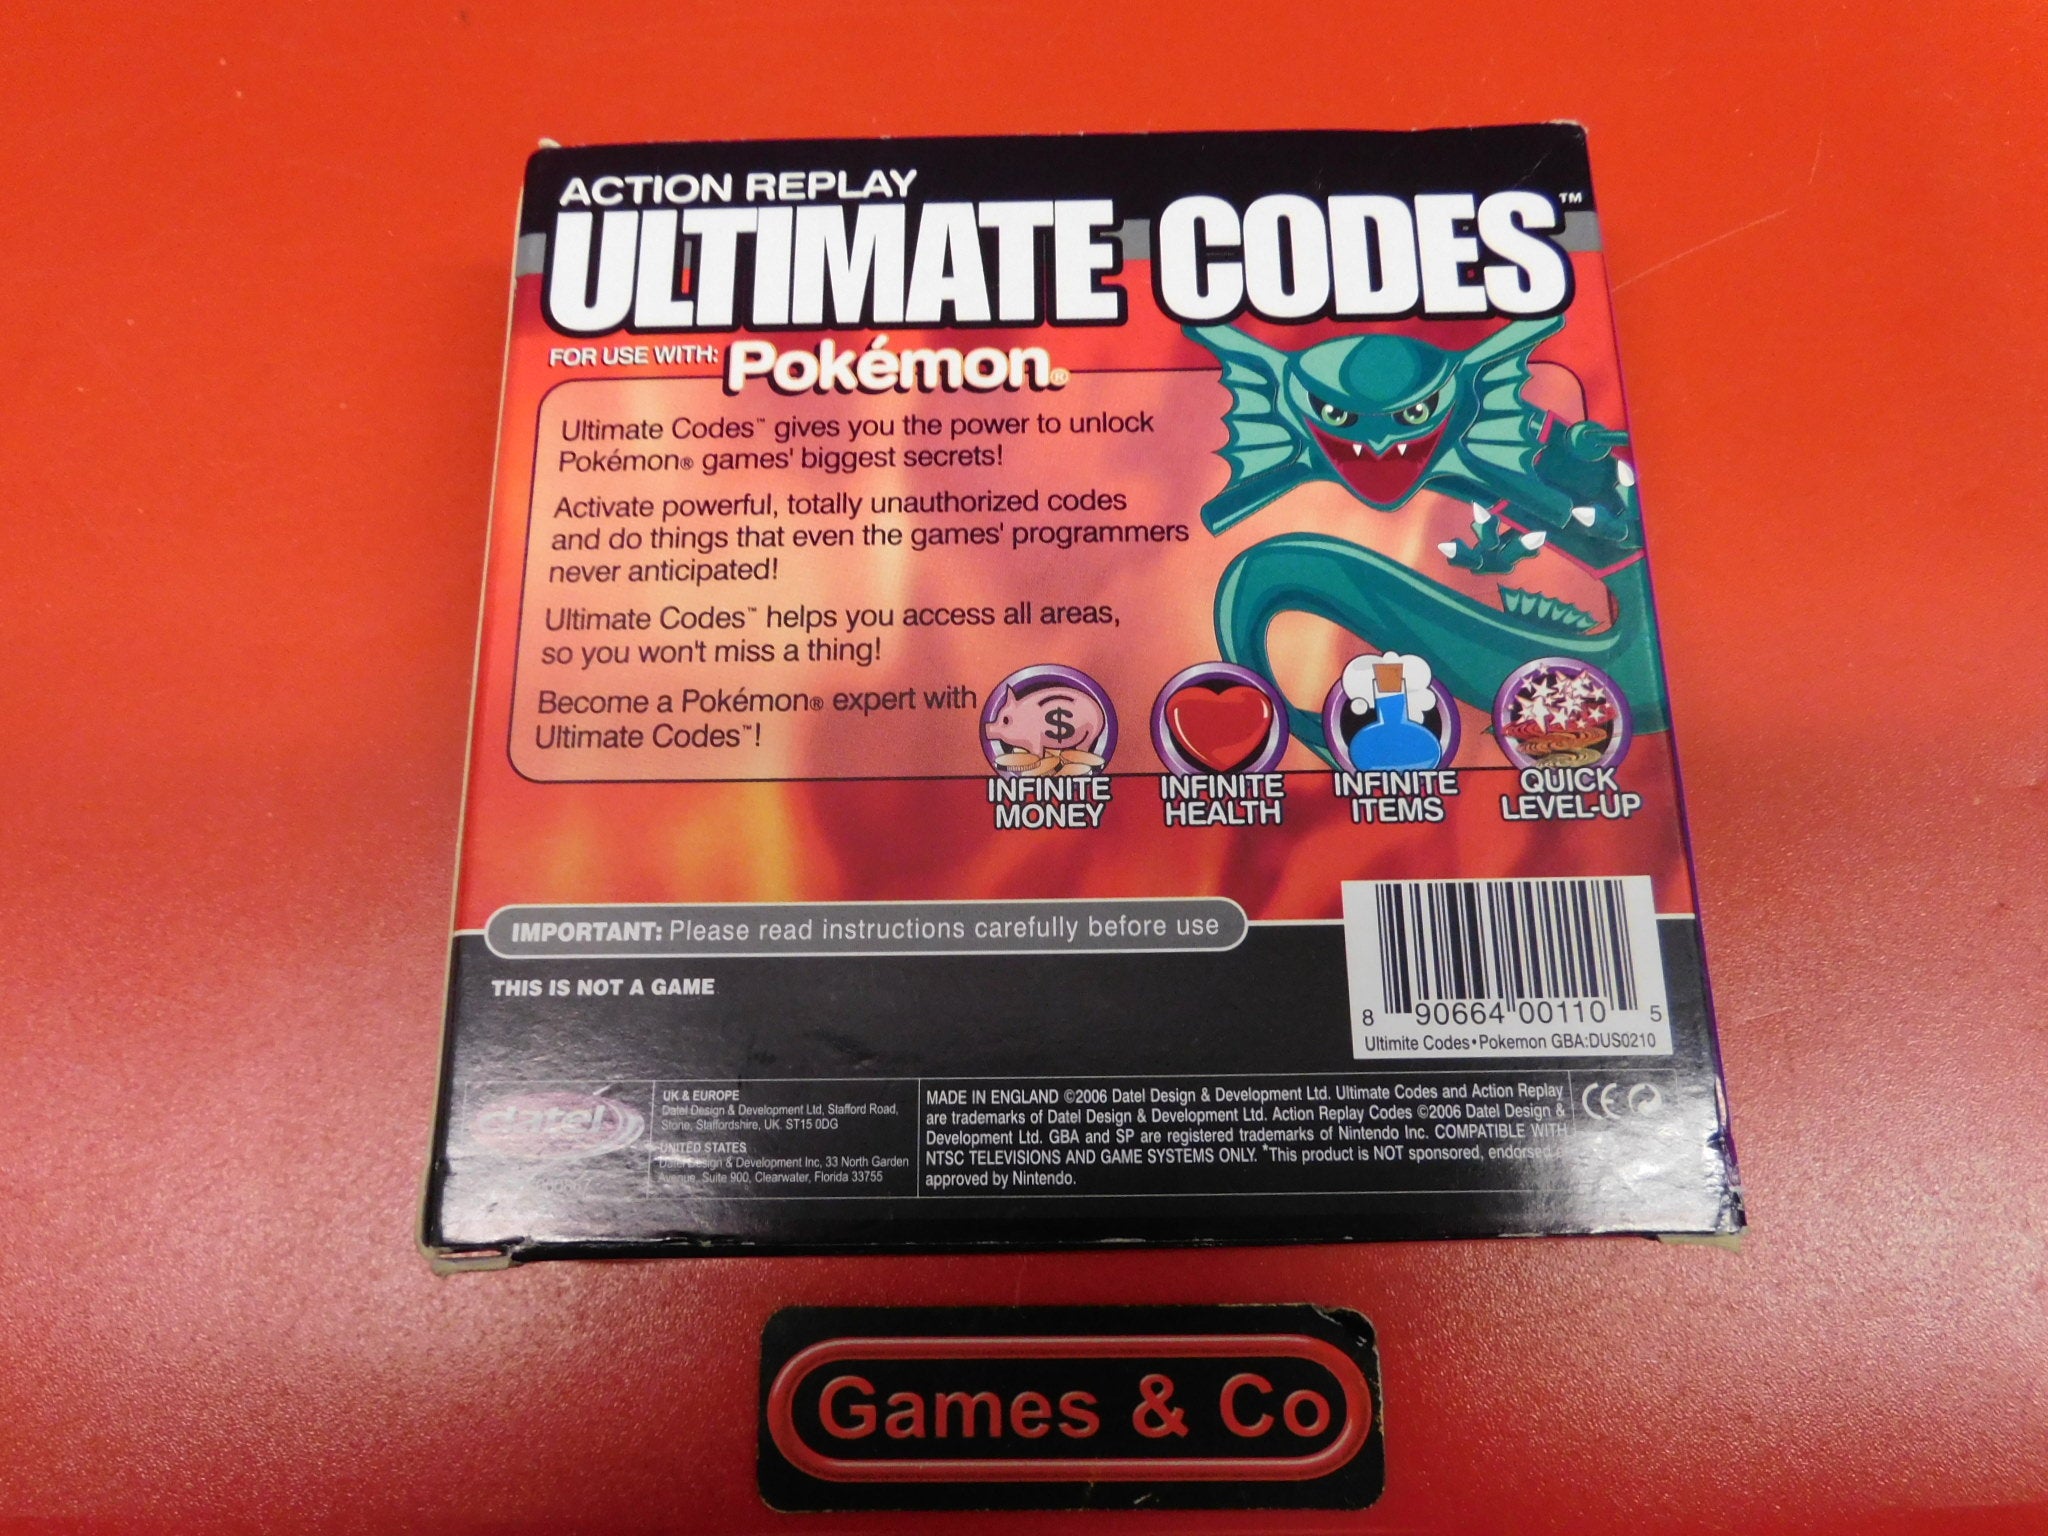 ACTION REPLAY ULTIMATE CODES FOR USE WITH POKEMON